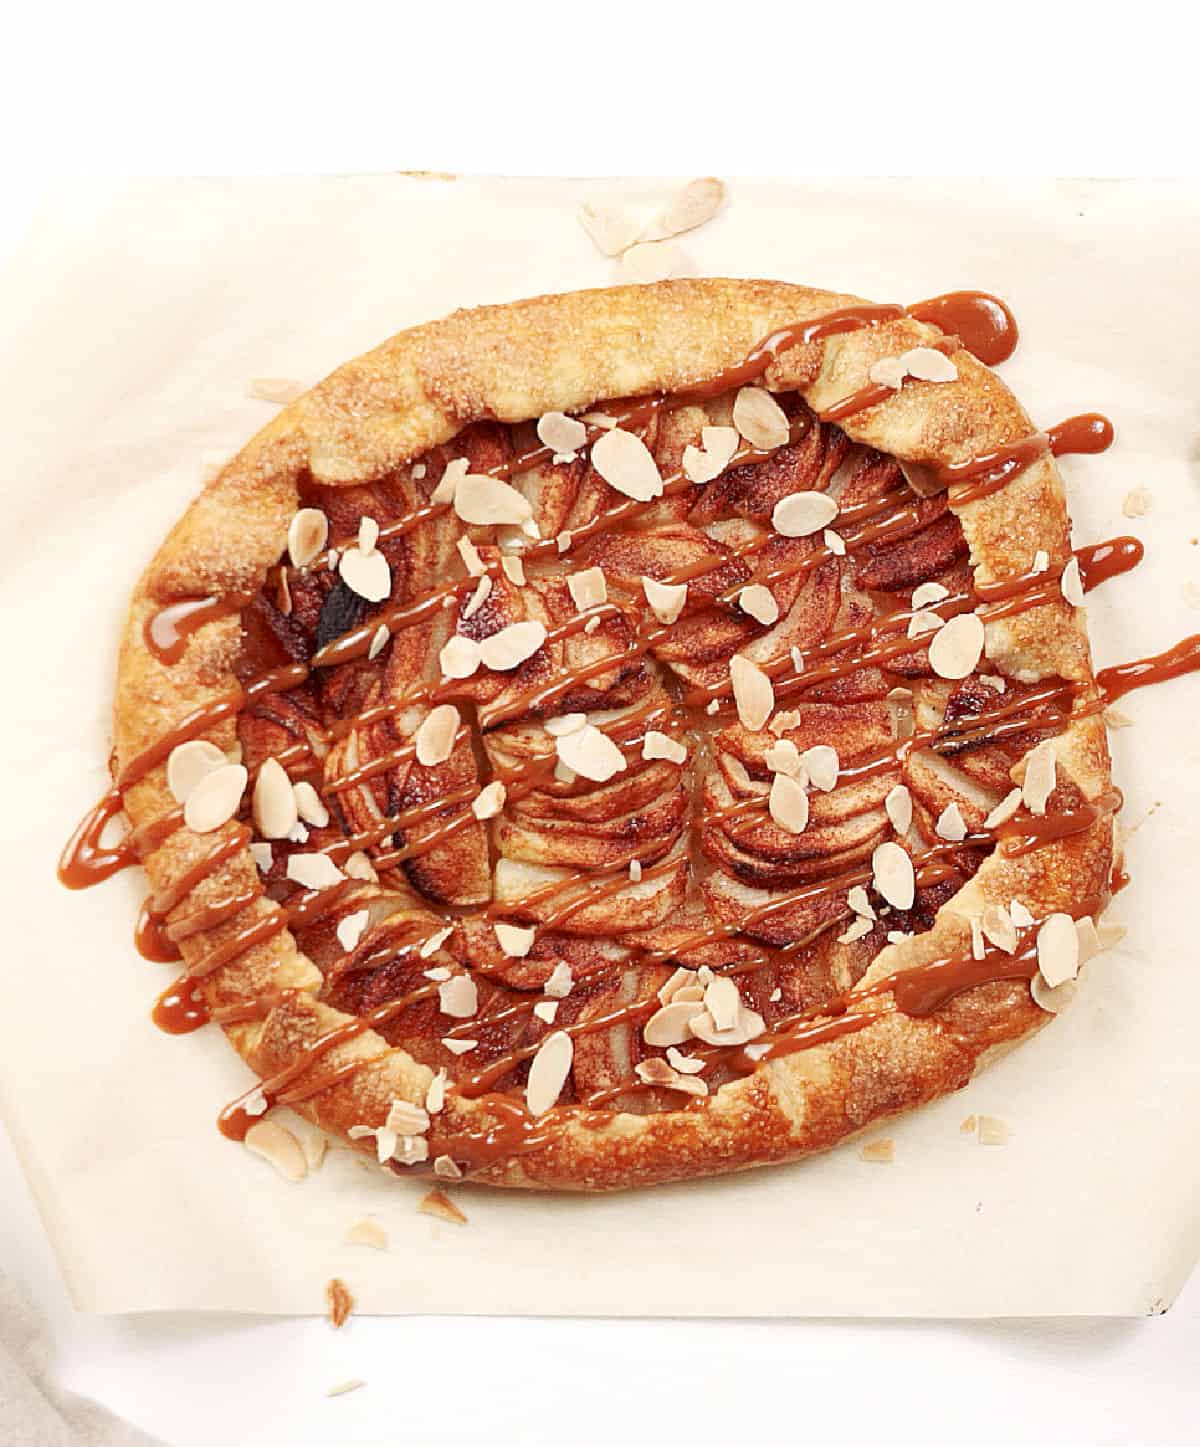 White surface with whole apple galette with caramel on parchment paper.